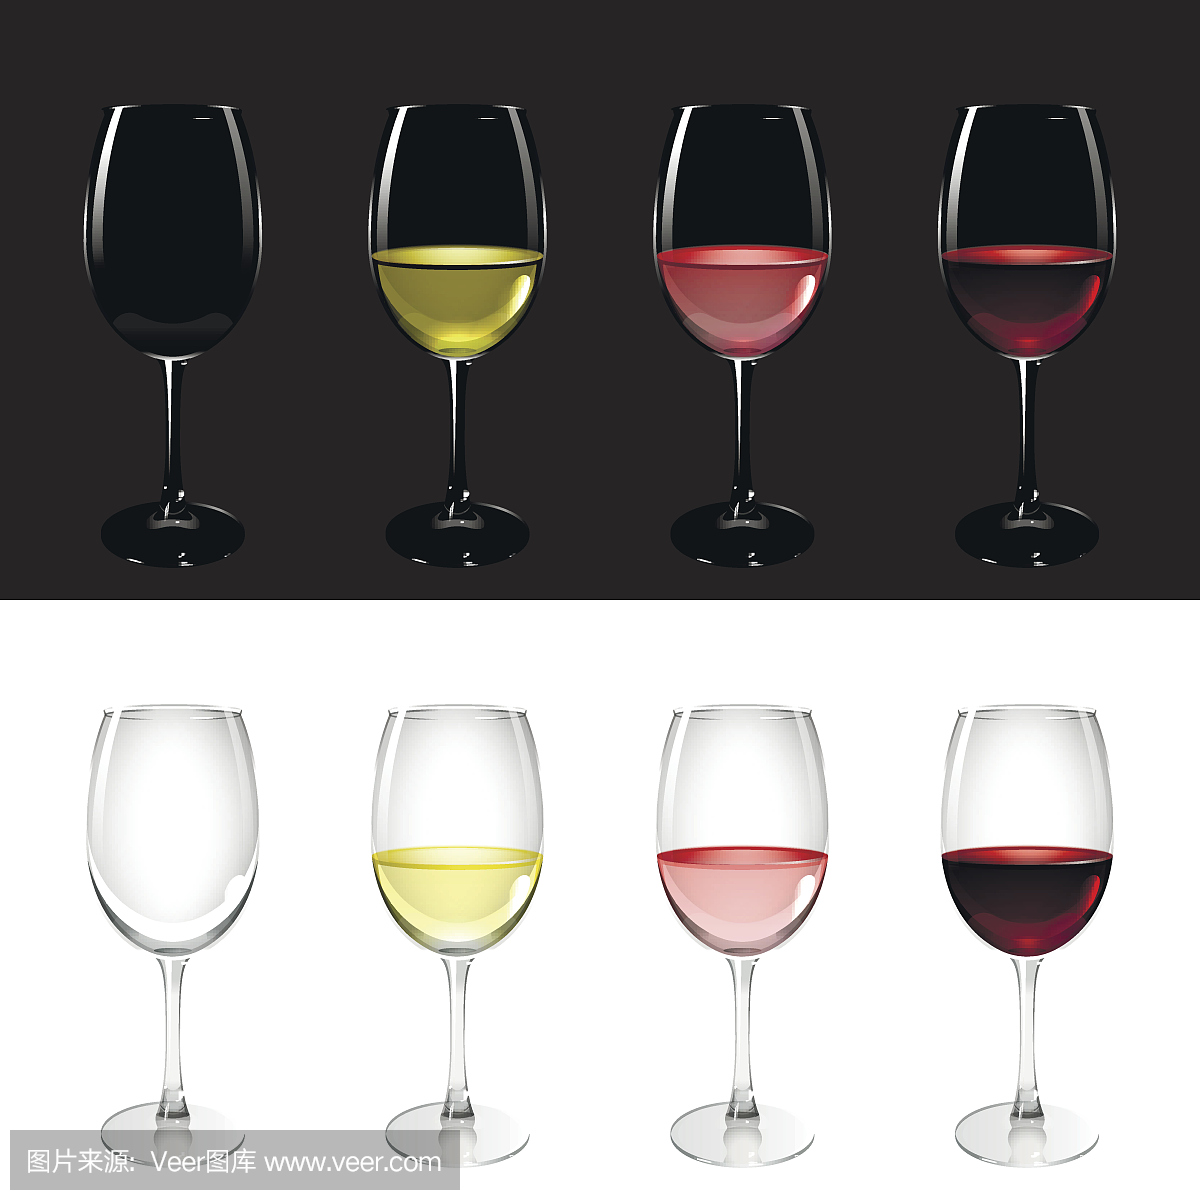 Wineglass with White, Pink and Red Wine